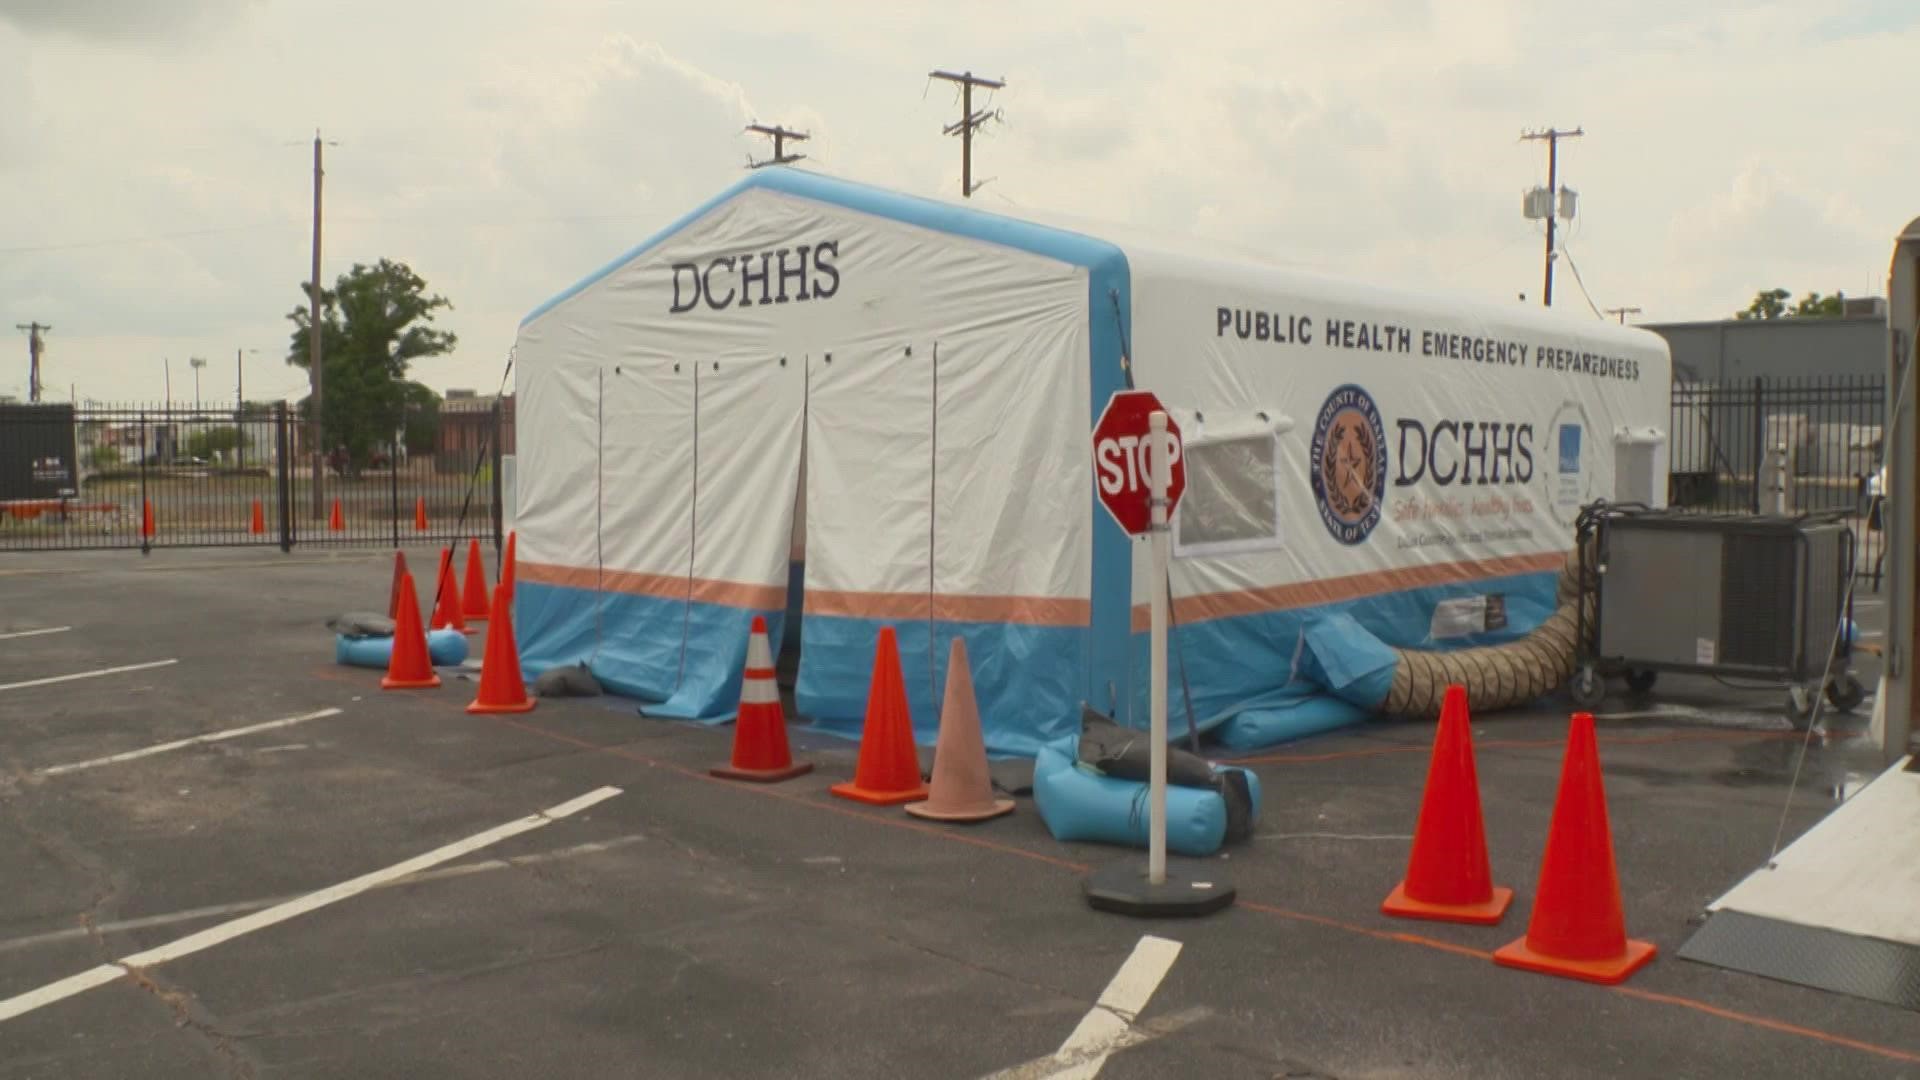 Appointments are required at the clinic that opened Thursday at DCHHS headquarters.